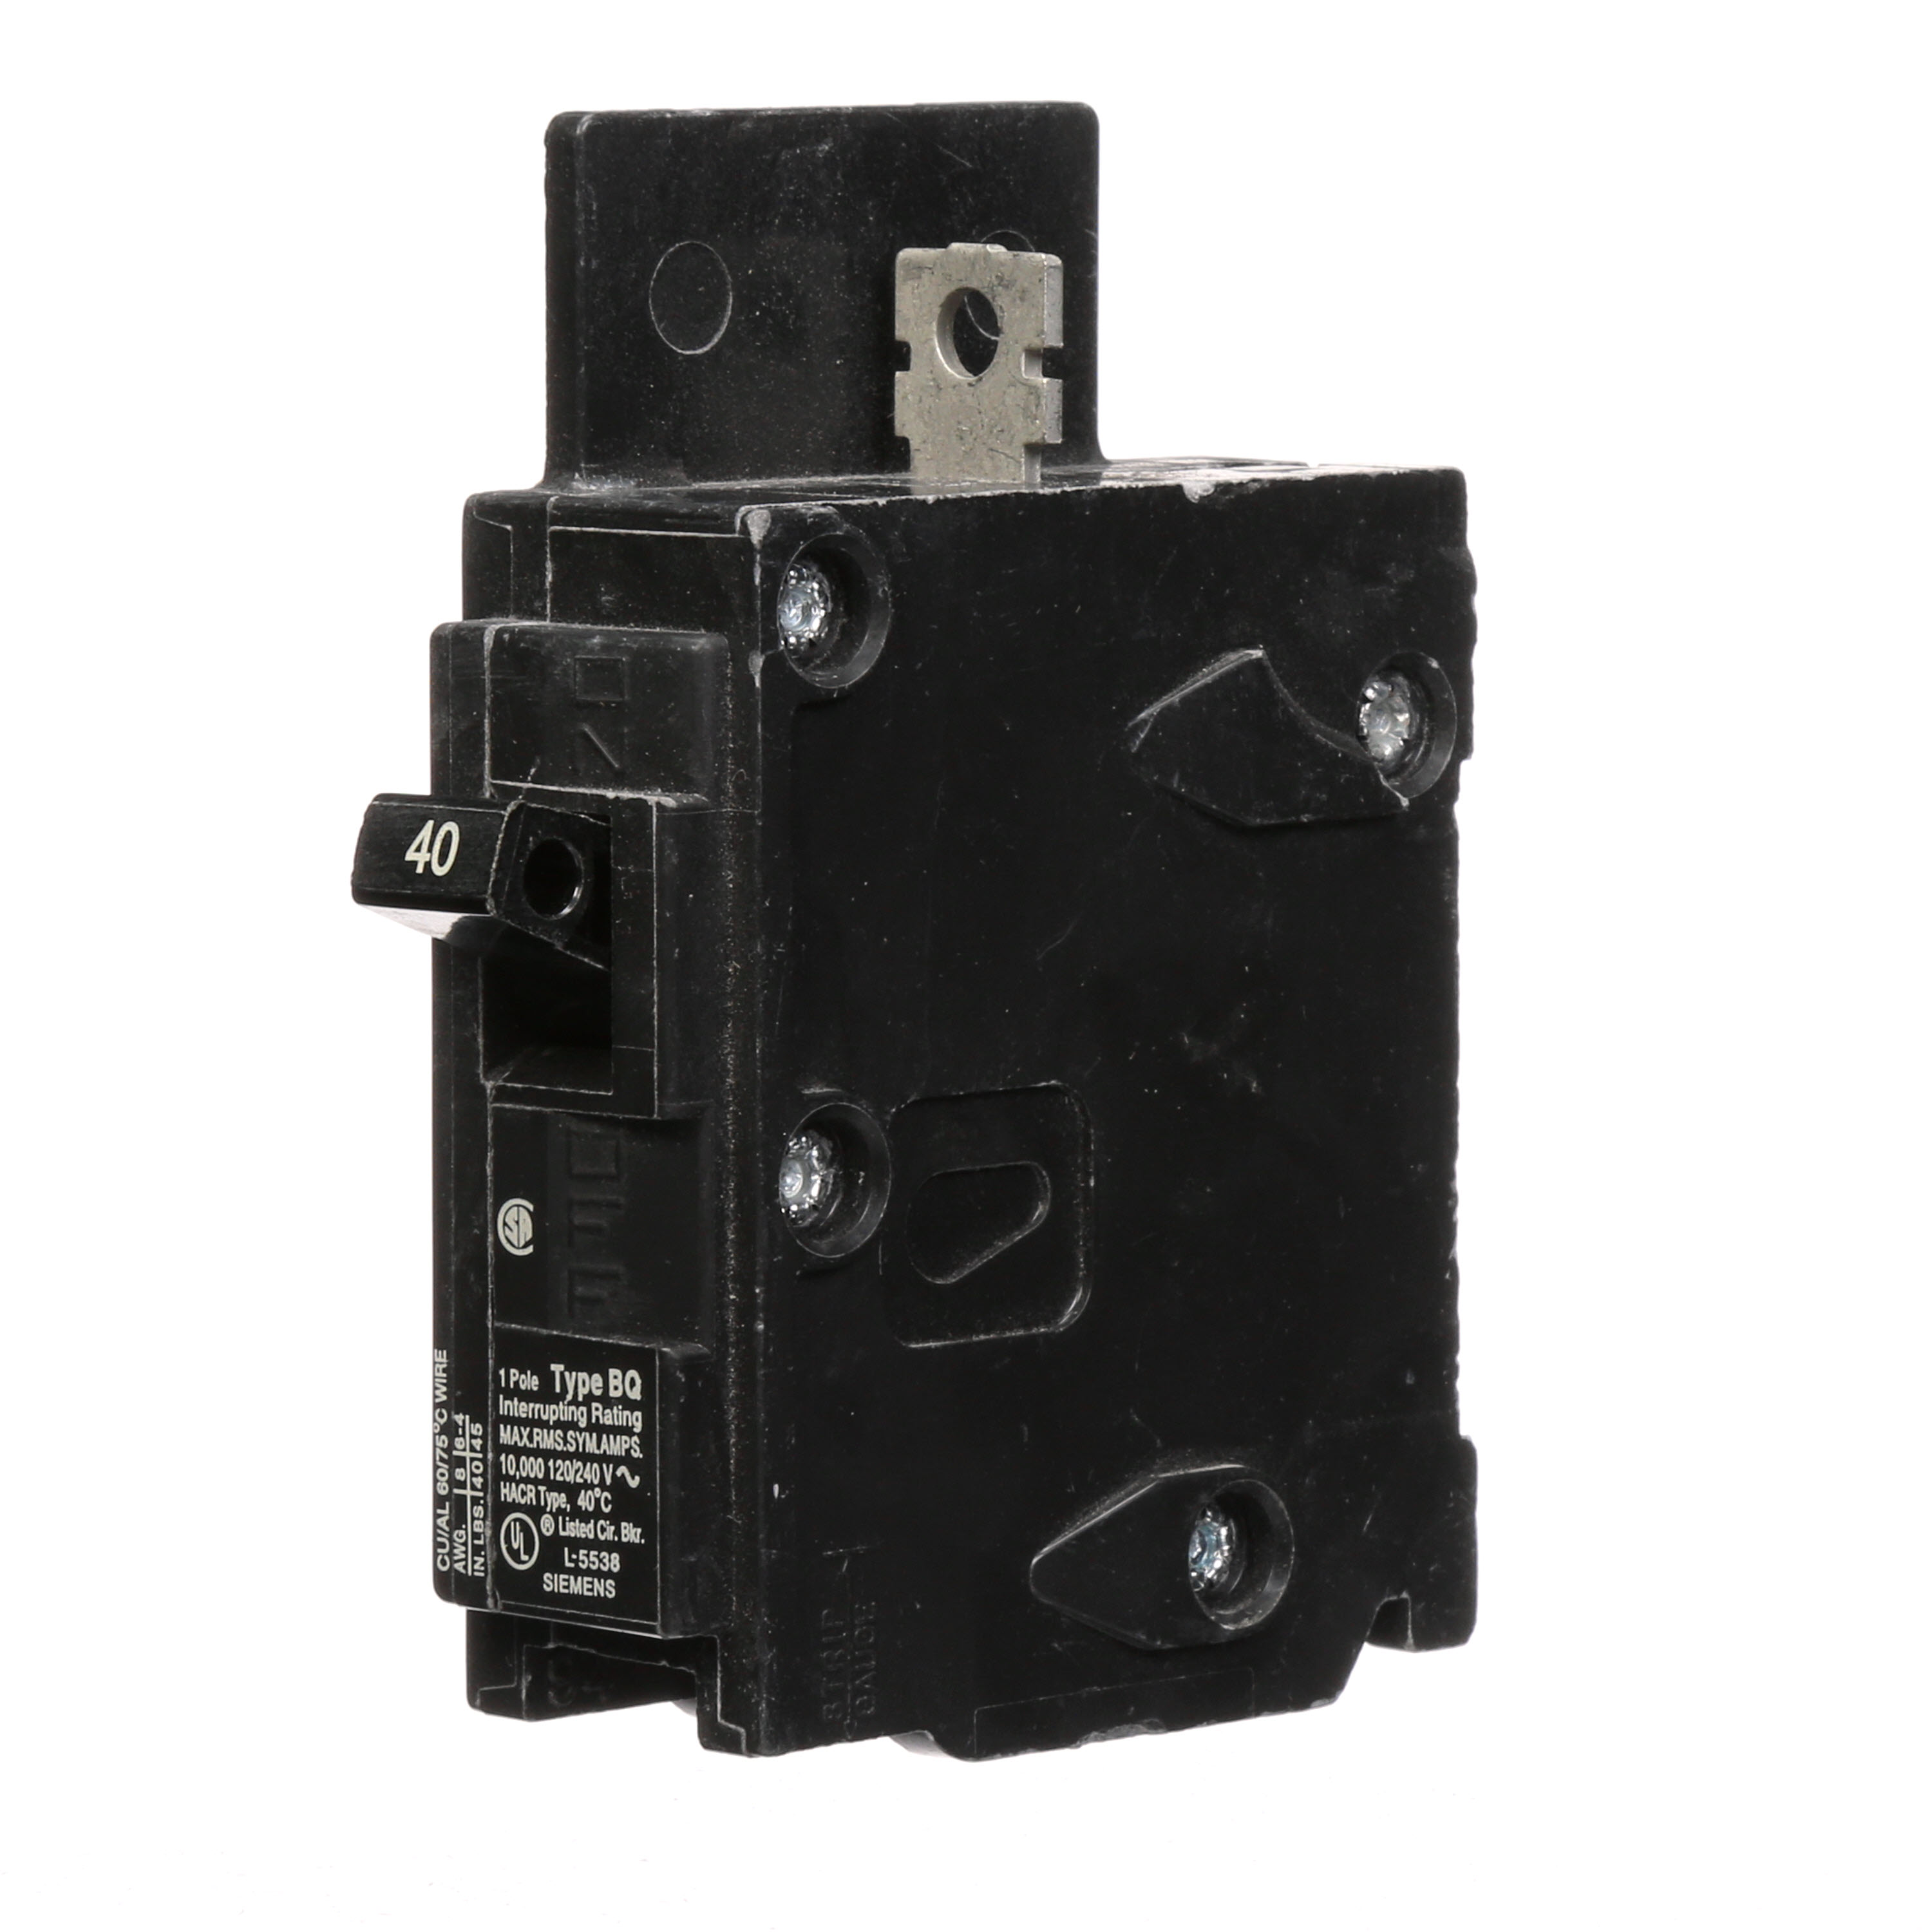 Siemens Low Voltage Molded Case Circuit Breakers General Purpose MCCBs are Circuit Protection Molded Case Circuit Breakers. 1-Pole circuit breaker type BQ. Rated 120V (040A) (AIR 10 kA). Special features Load side lugs are included.